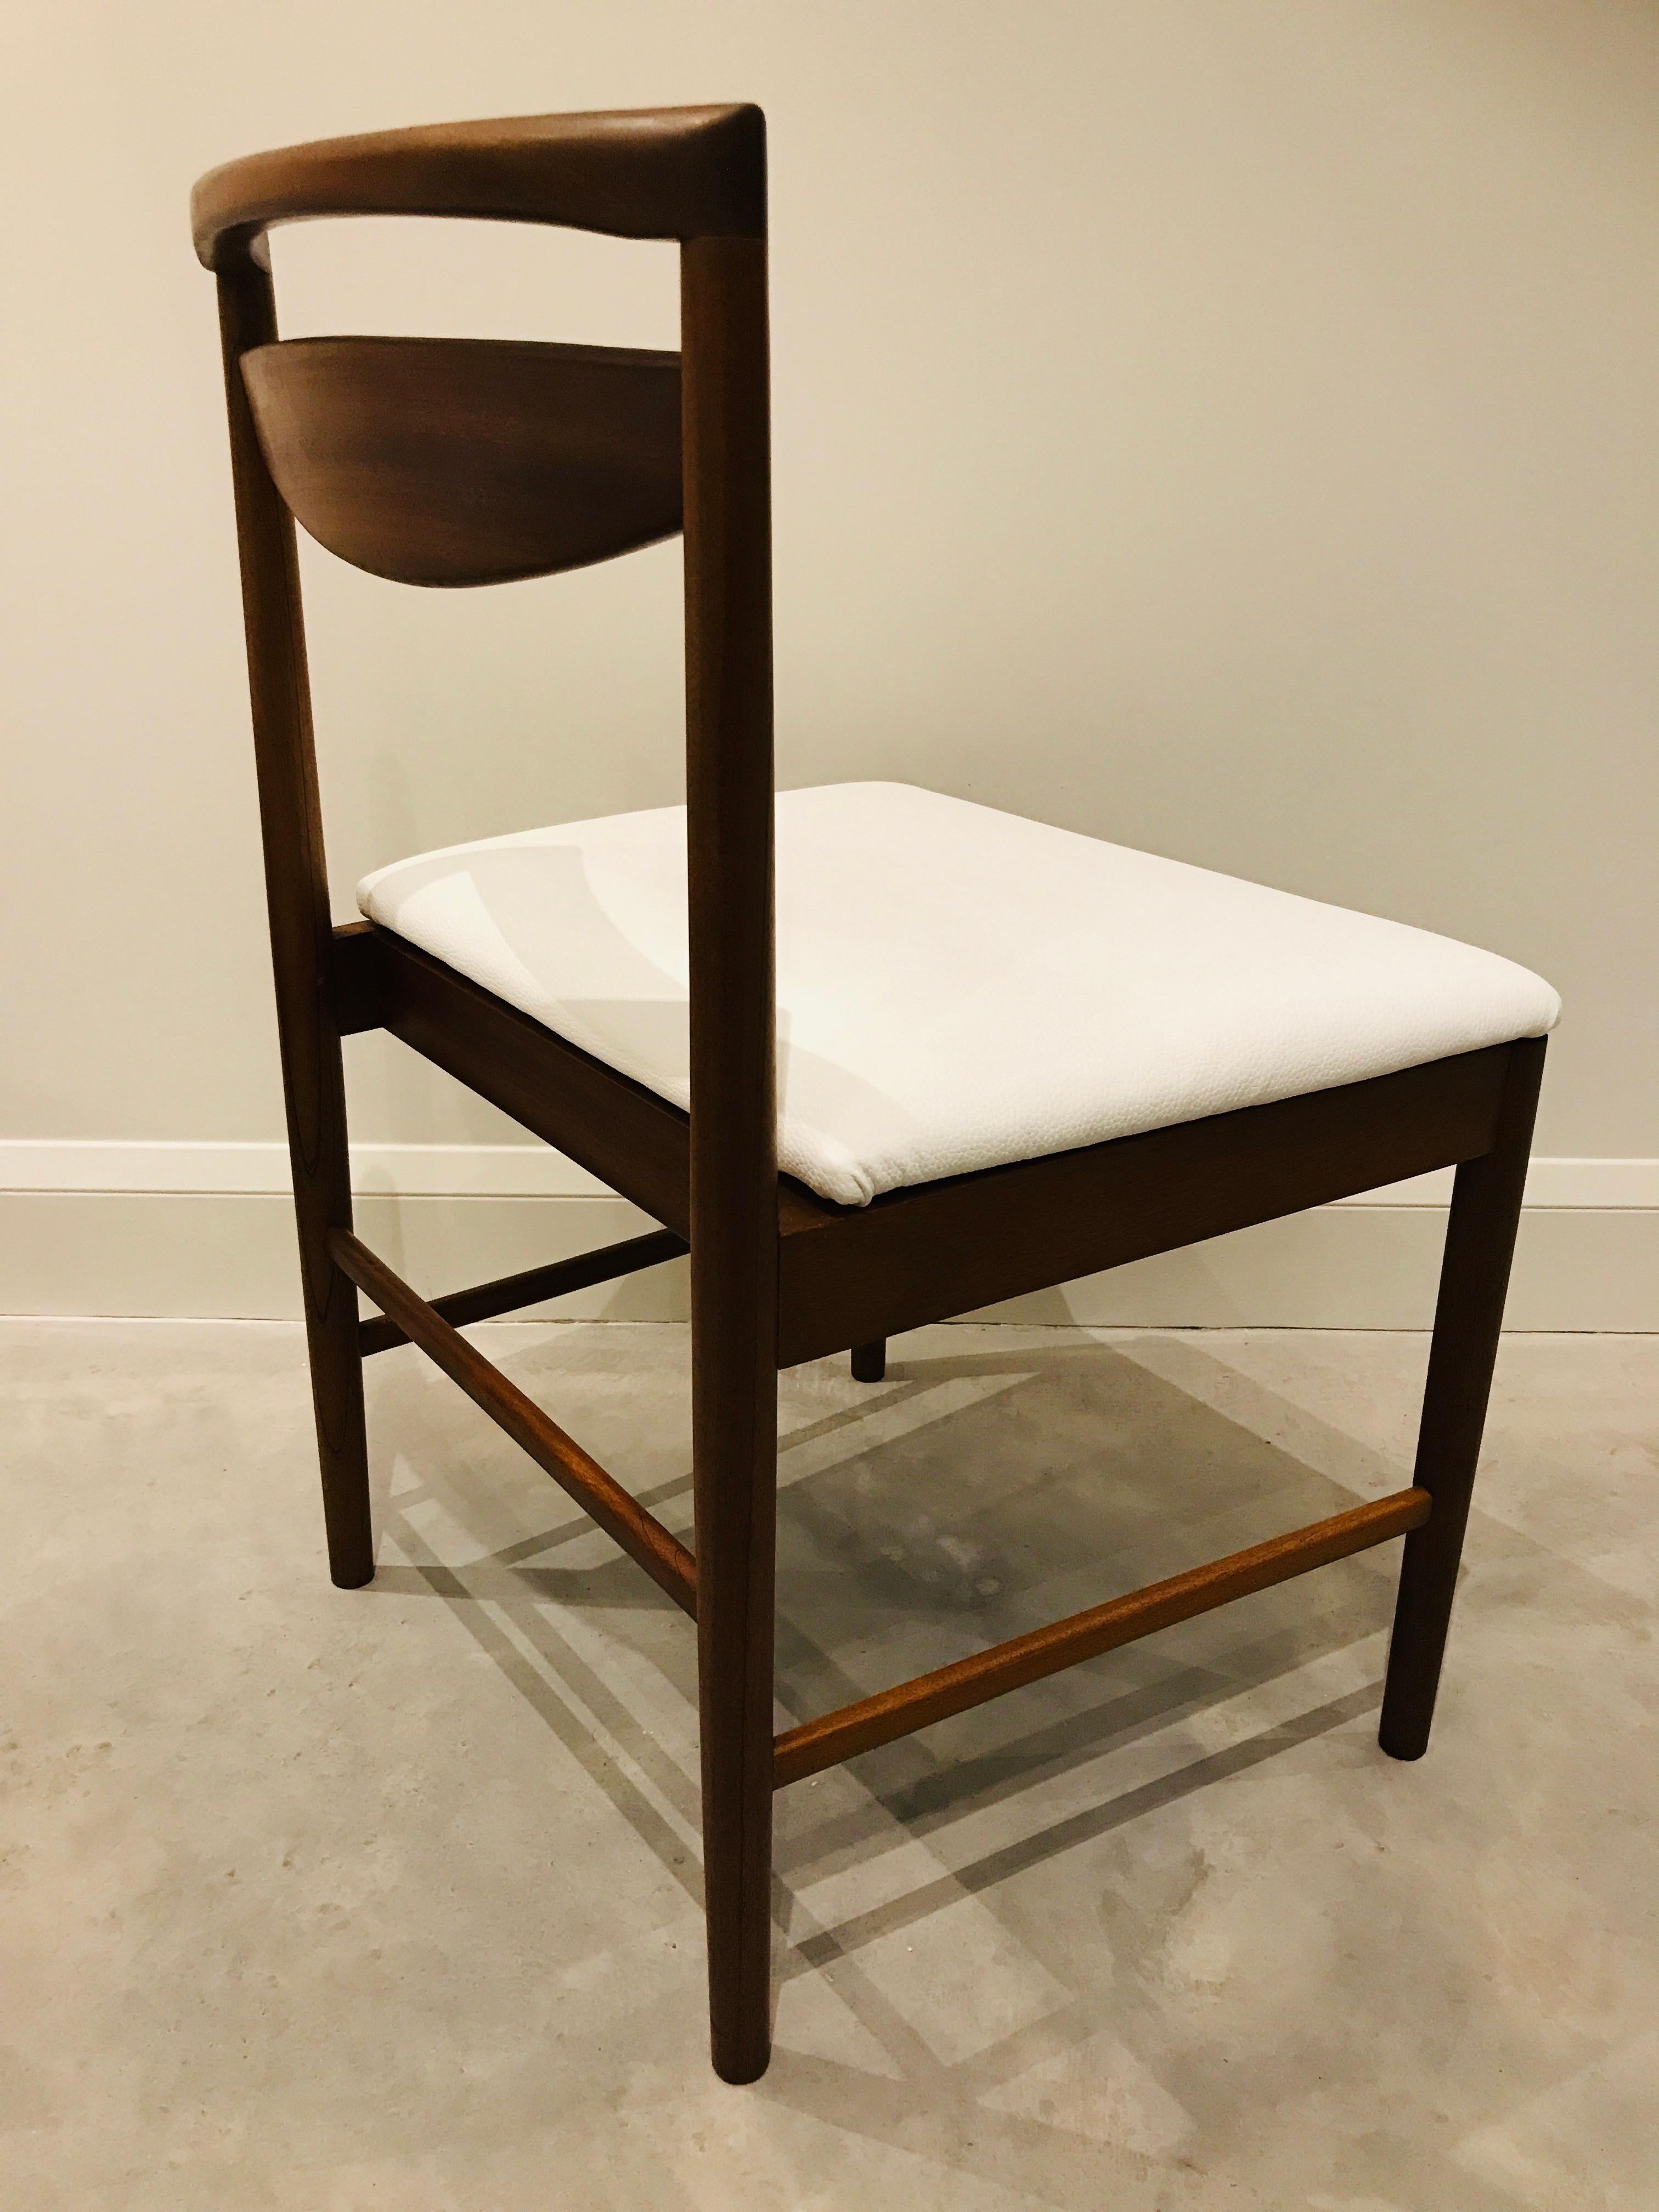 1970 Vintage Teak McIntosh Retro Dining Chairs Upholstered in White Leather For Sale 8